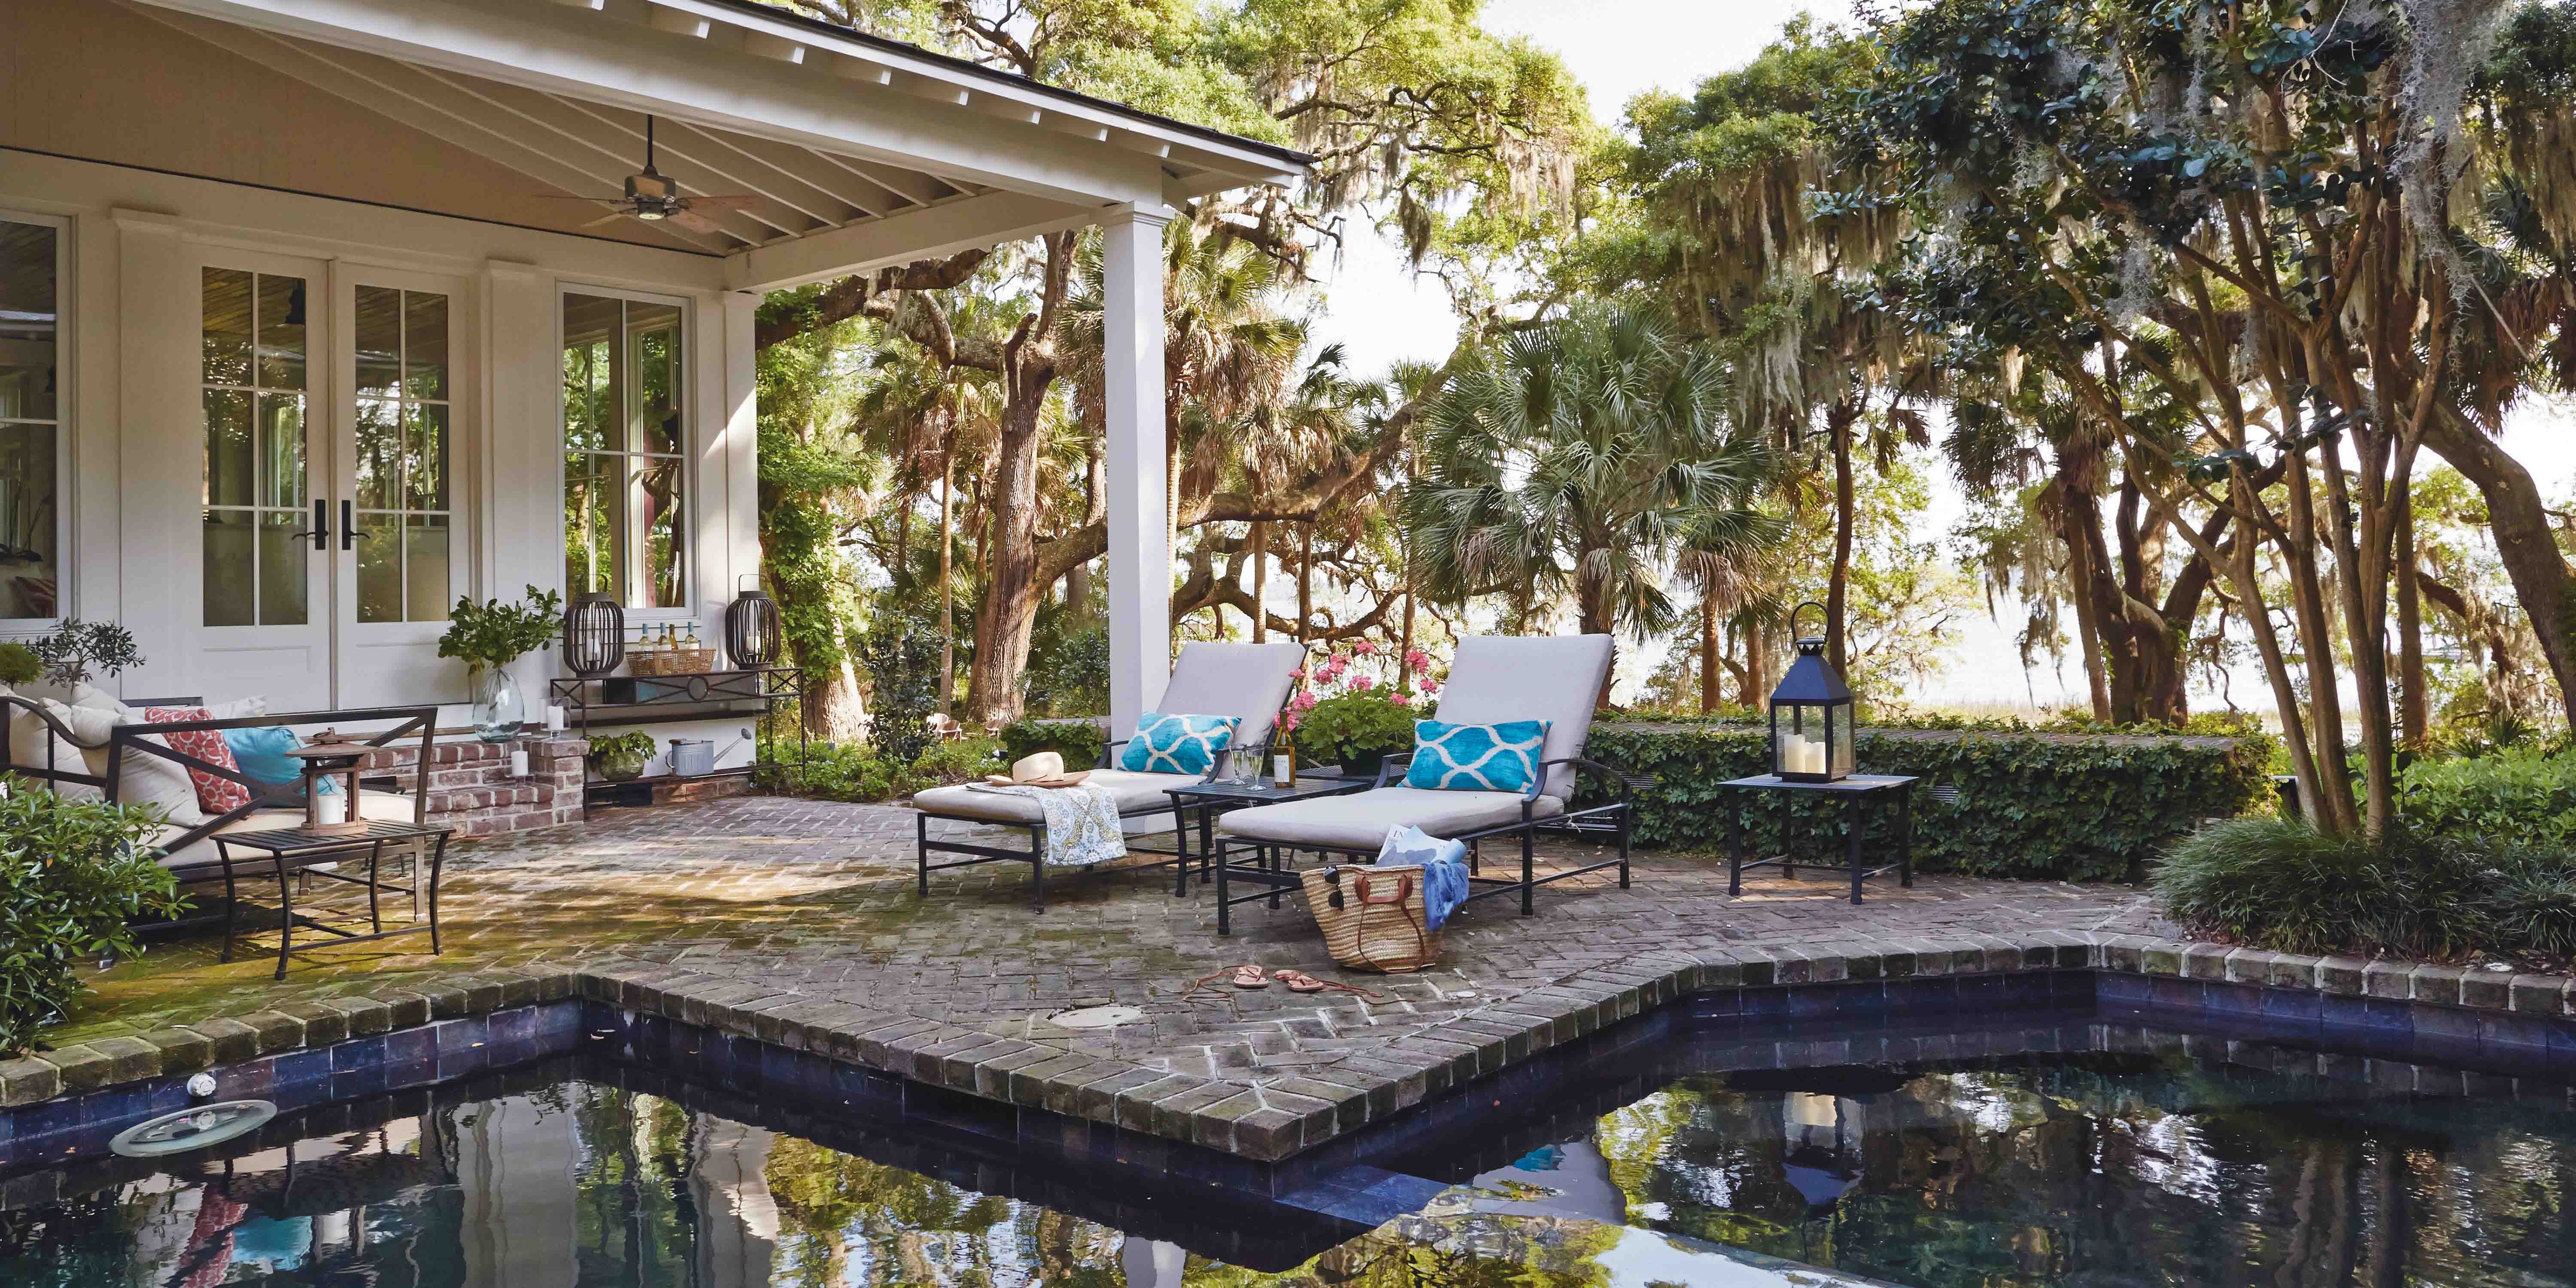 View of pool and brick patio in Palmetto Bluff designed by J Banks Design Group